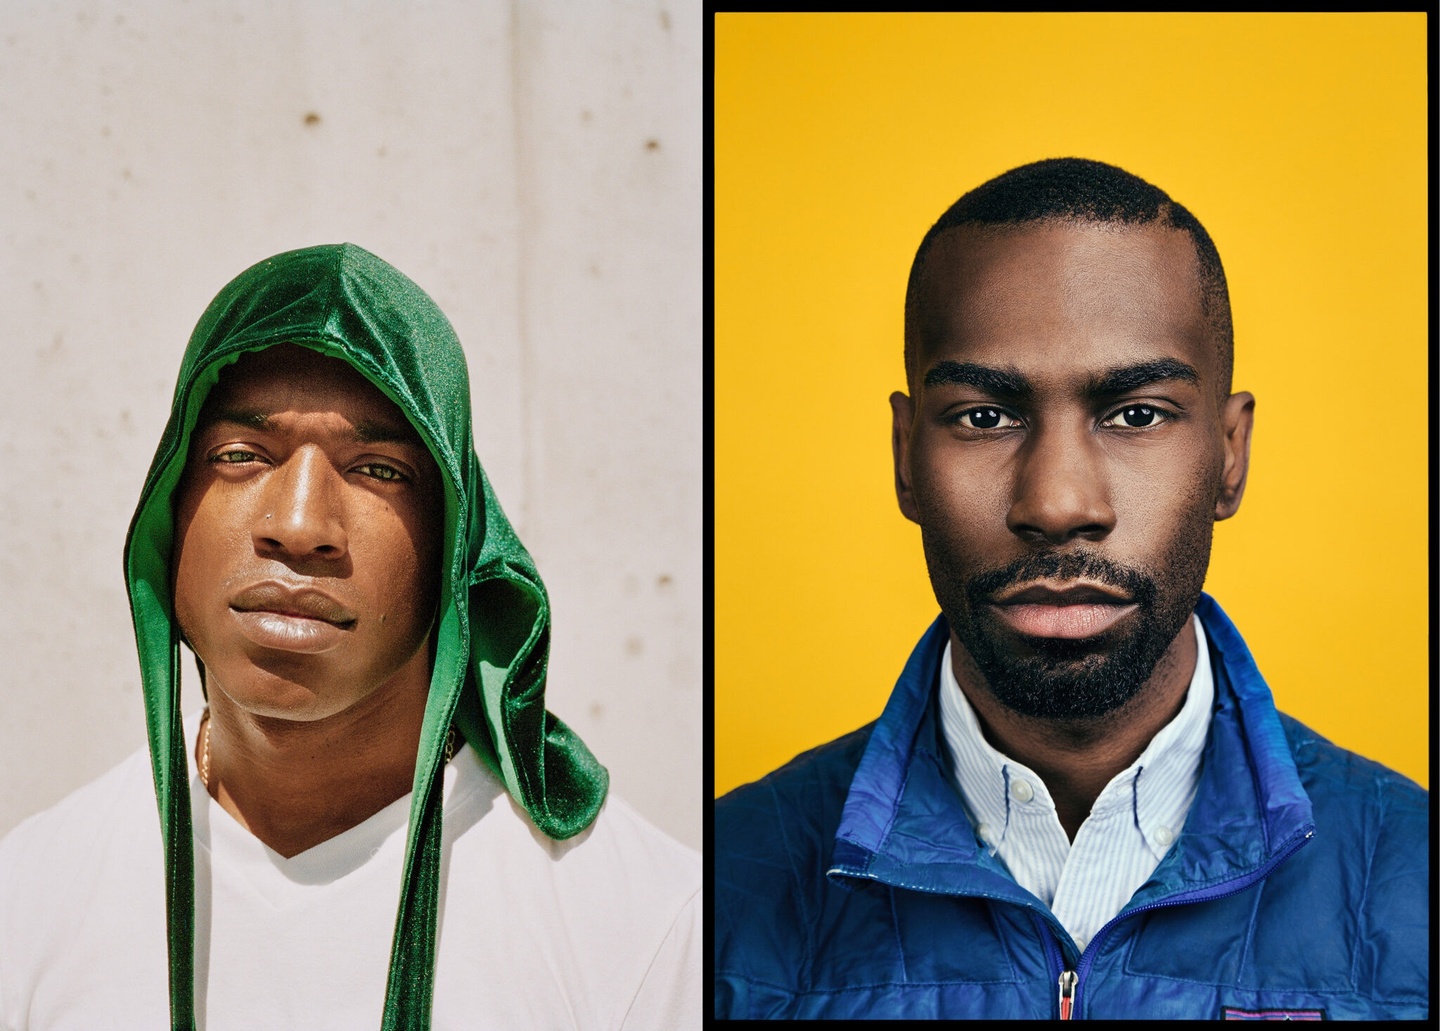 Two inket print portaits, the first of a person in a white shirt with a green durag, set against a white background, and the second of an individual with a blue quilted vest on a yellow background.